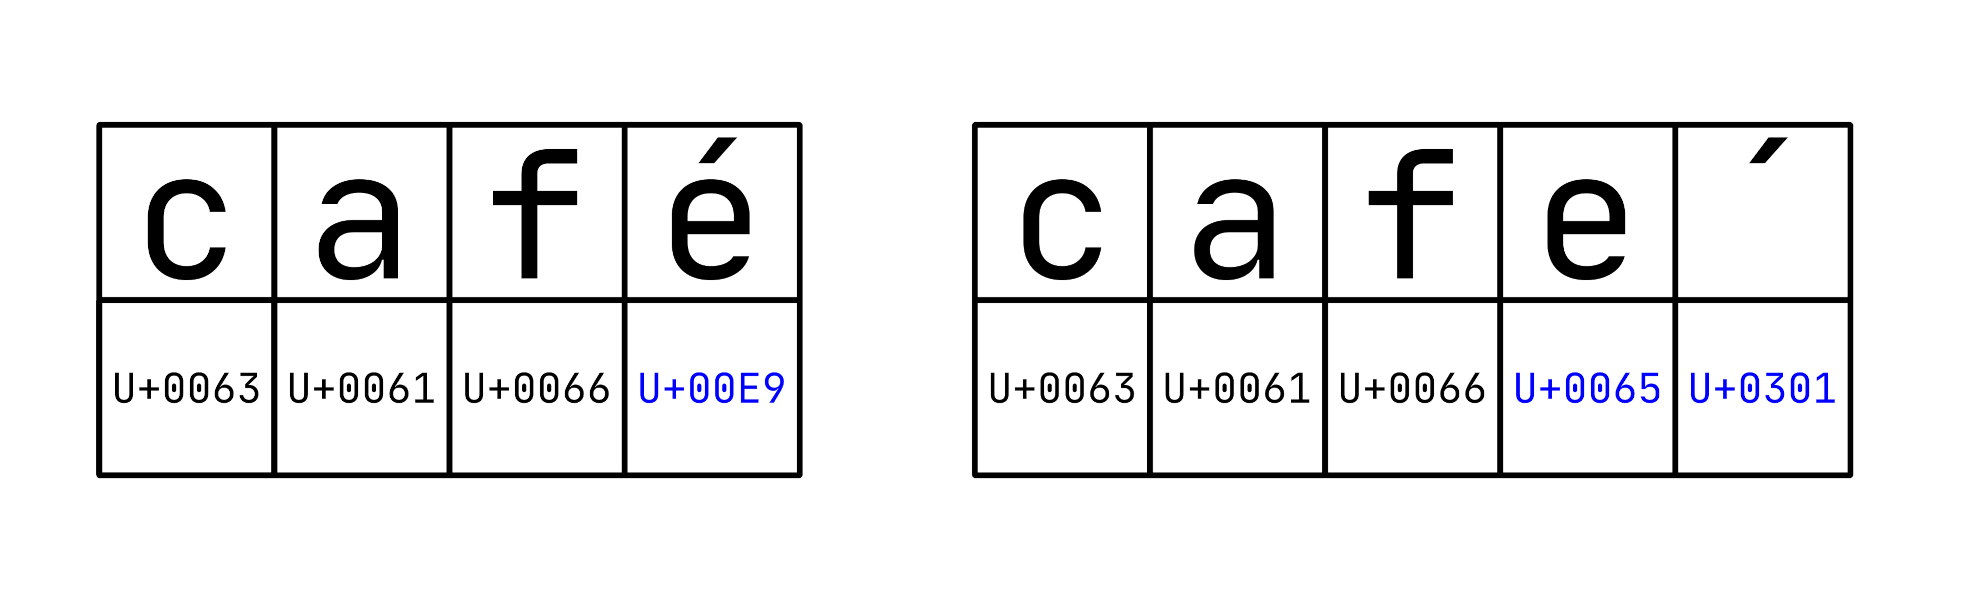 Canonical Equivalence of Unicode Strings